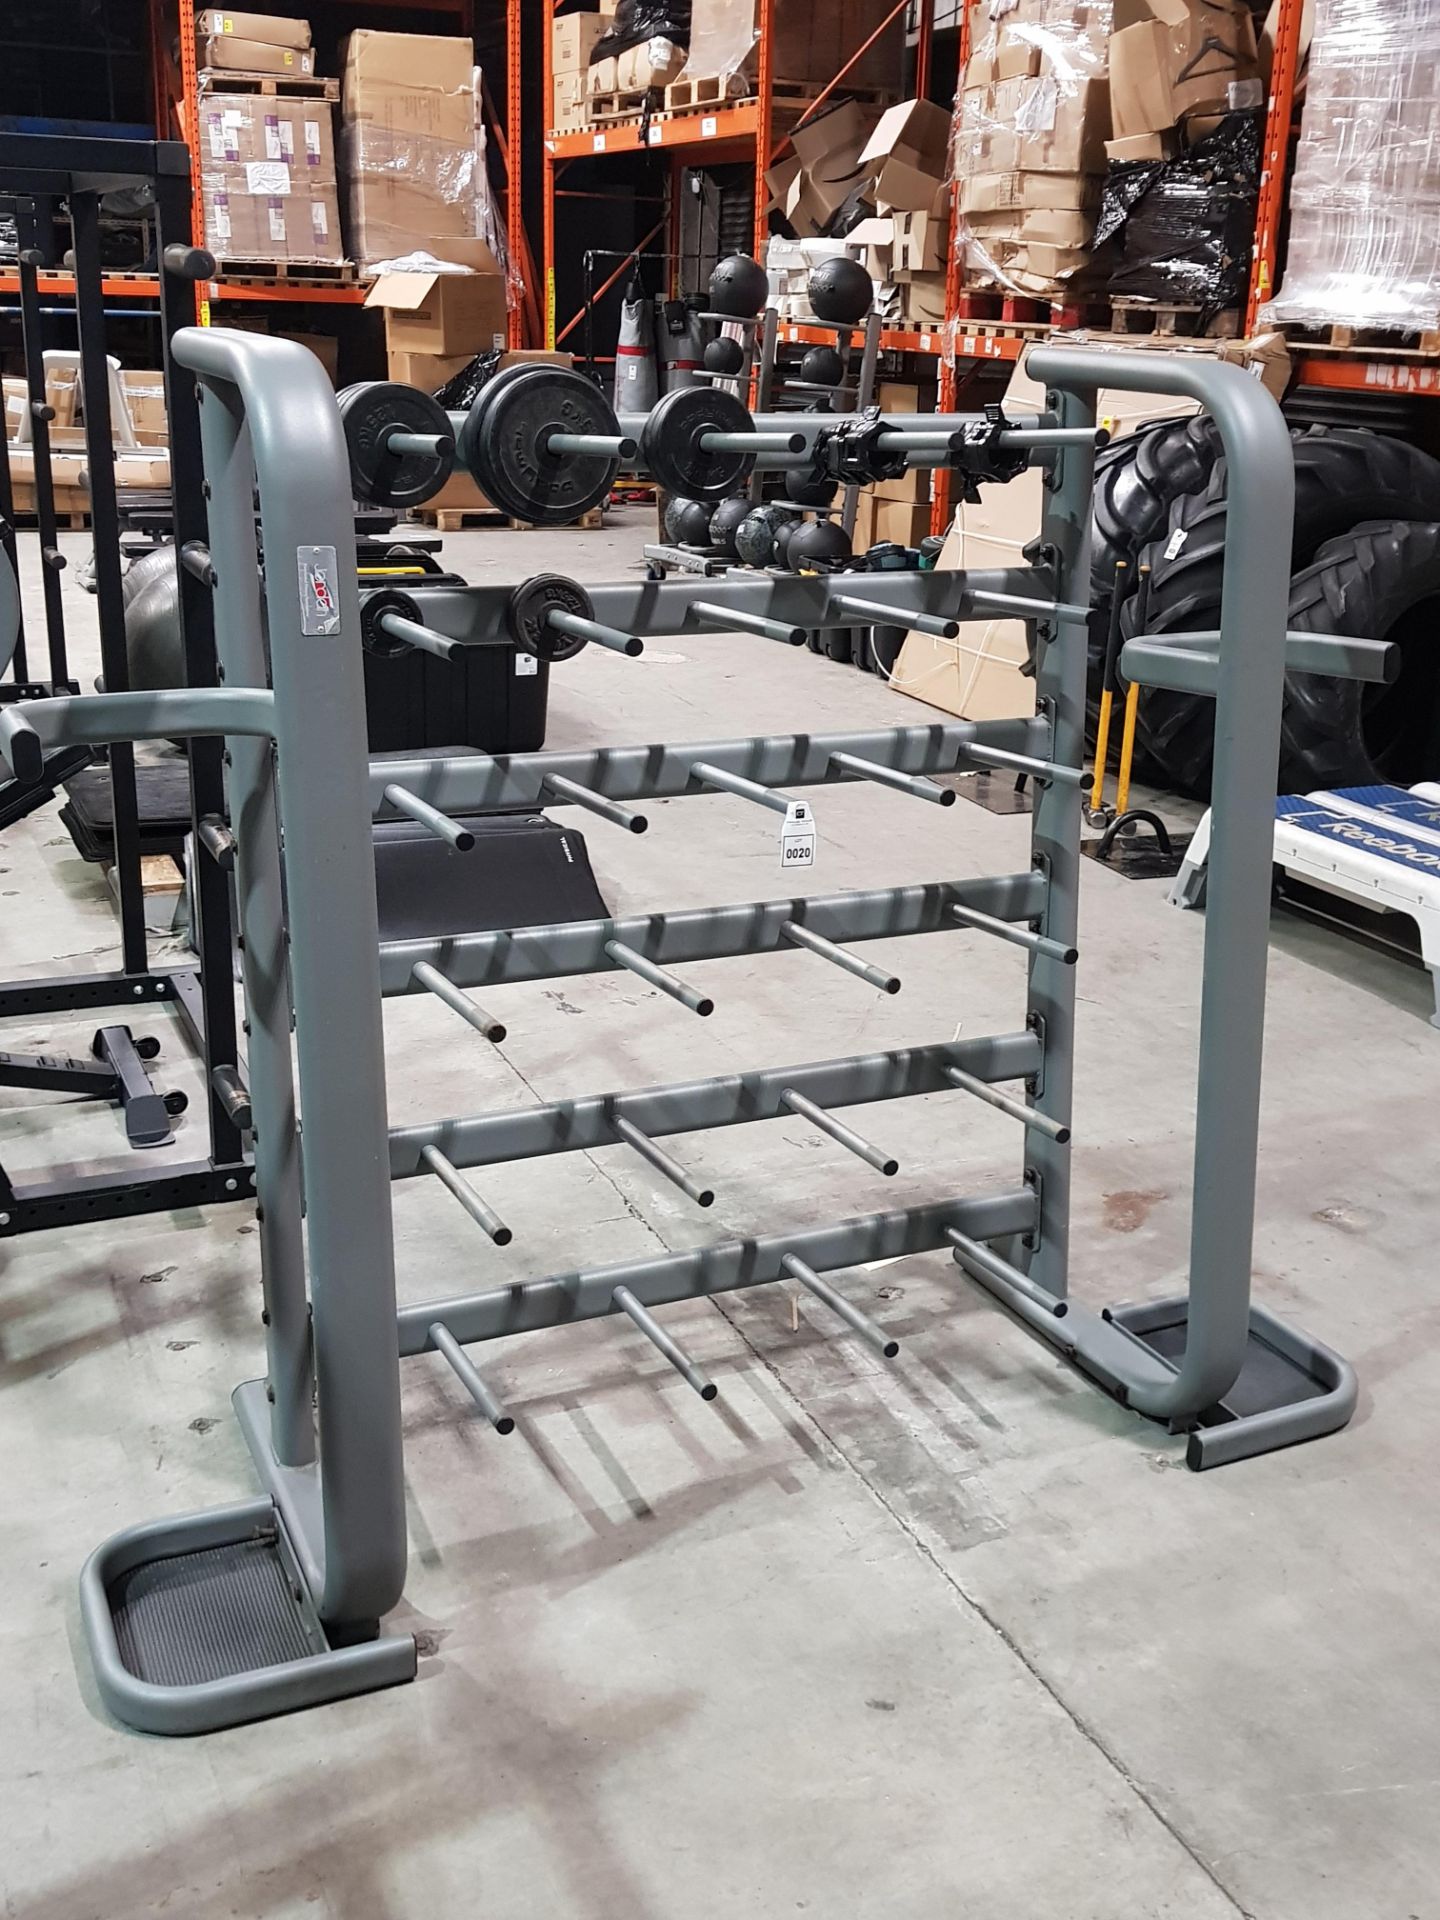 1 X 6 TIER JORDAN BARBELL AND WEIGHT PLATES RACK - IN GREY